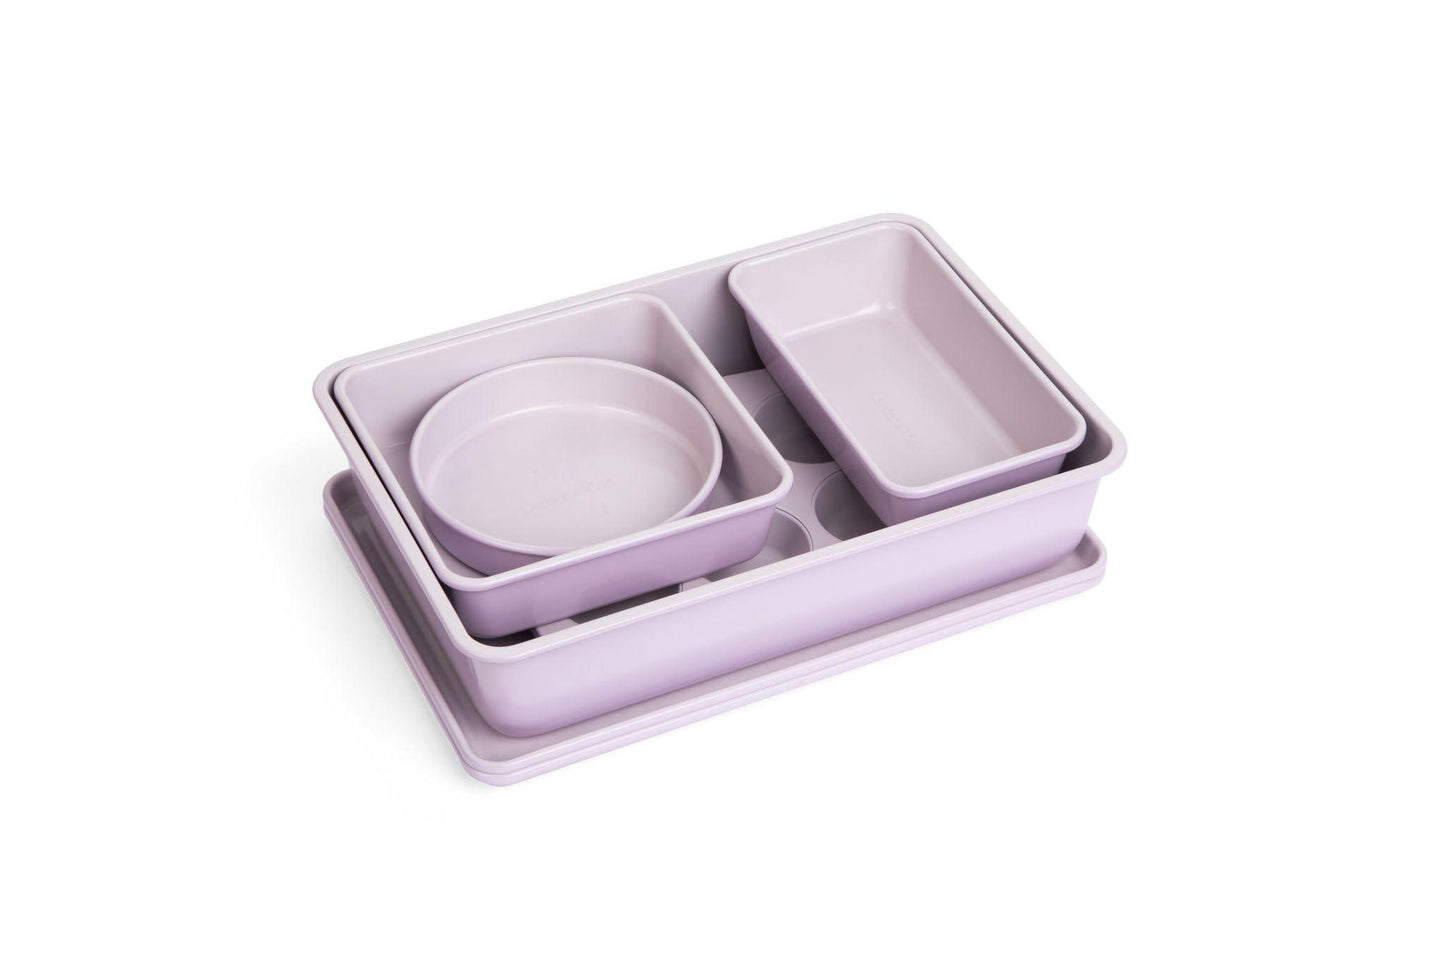 Larder & Vine Bakeware Set - PFAS/PFOS/PTFE Free, Heavy Duty Aluminized Steel with Ceramic Finish, Includes Sheet Pans, Loaf Pan, Muffin Tins, Round Pan, Square Pan, Roasting Pan (Lavender) - CookCave